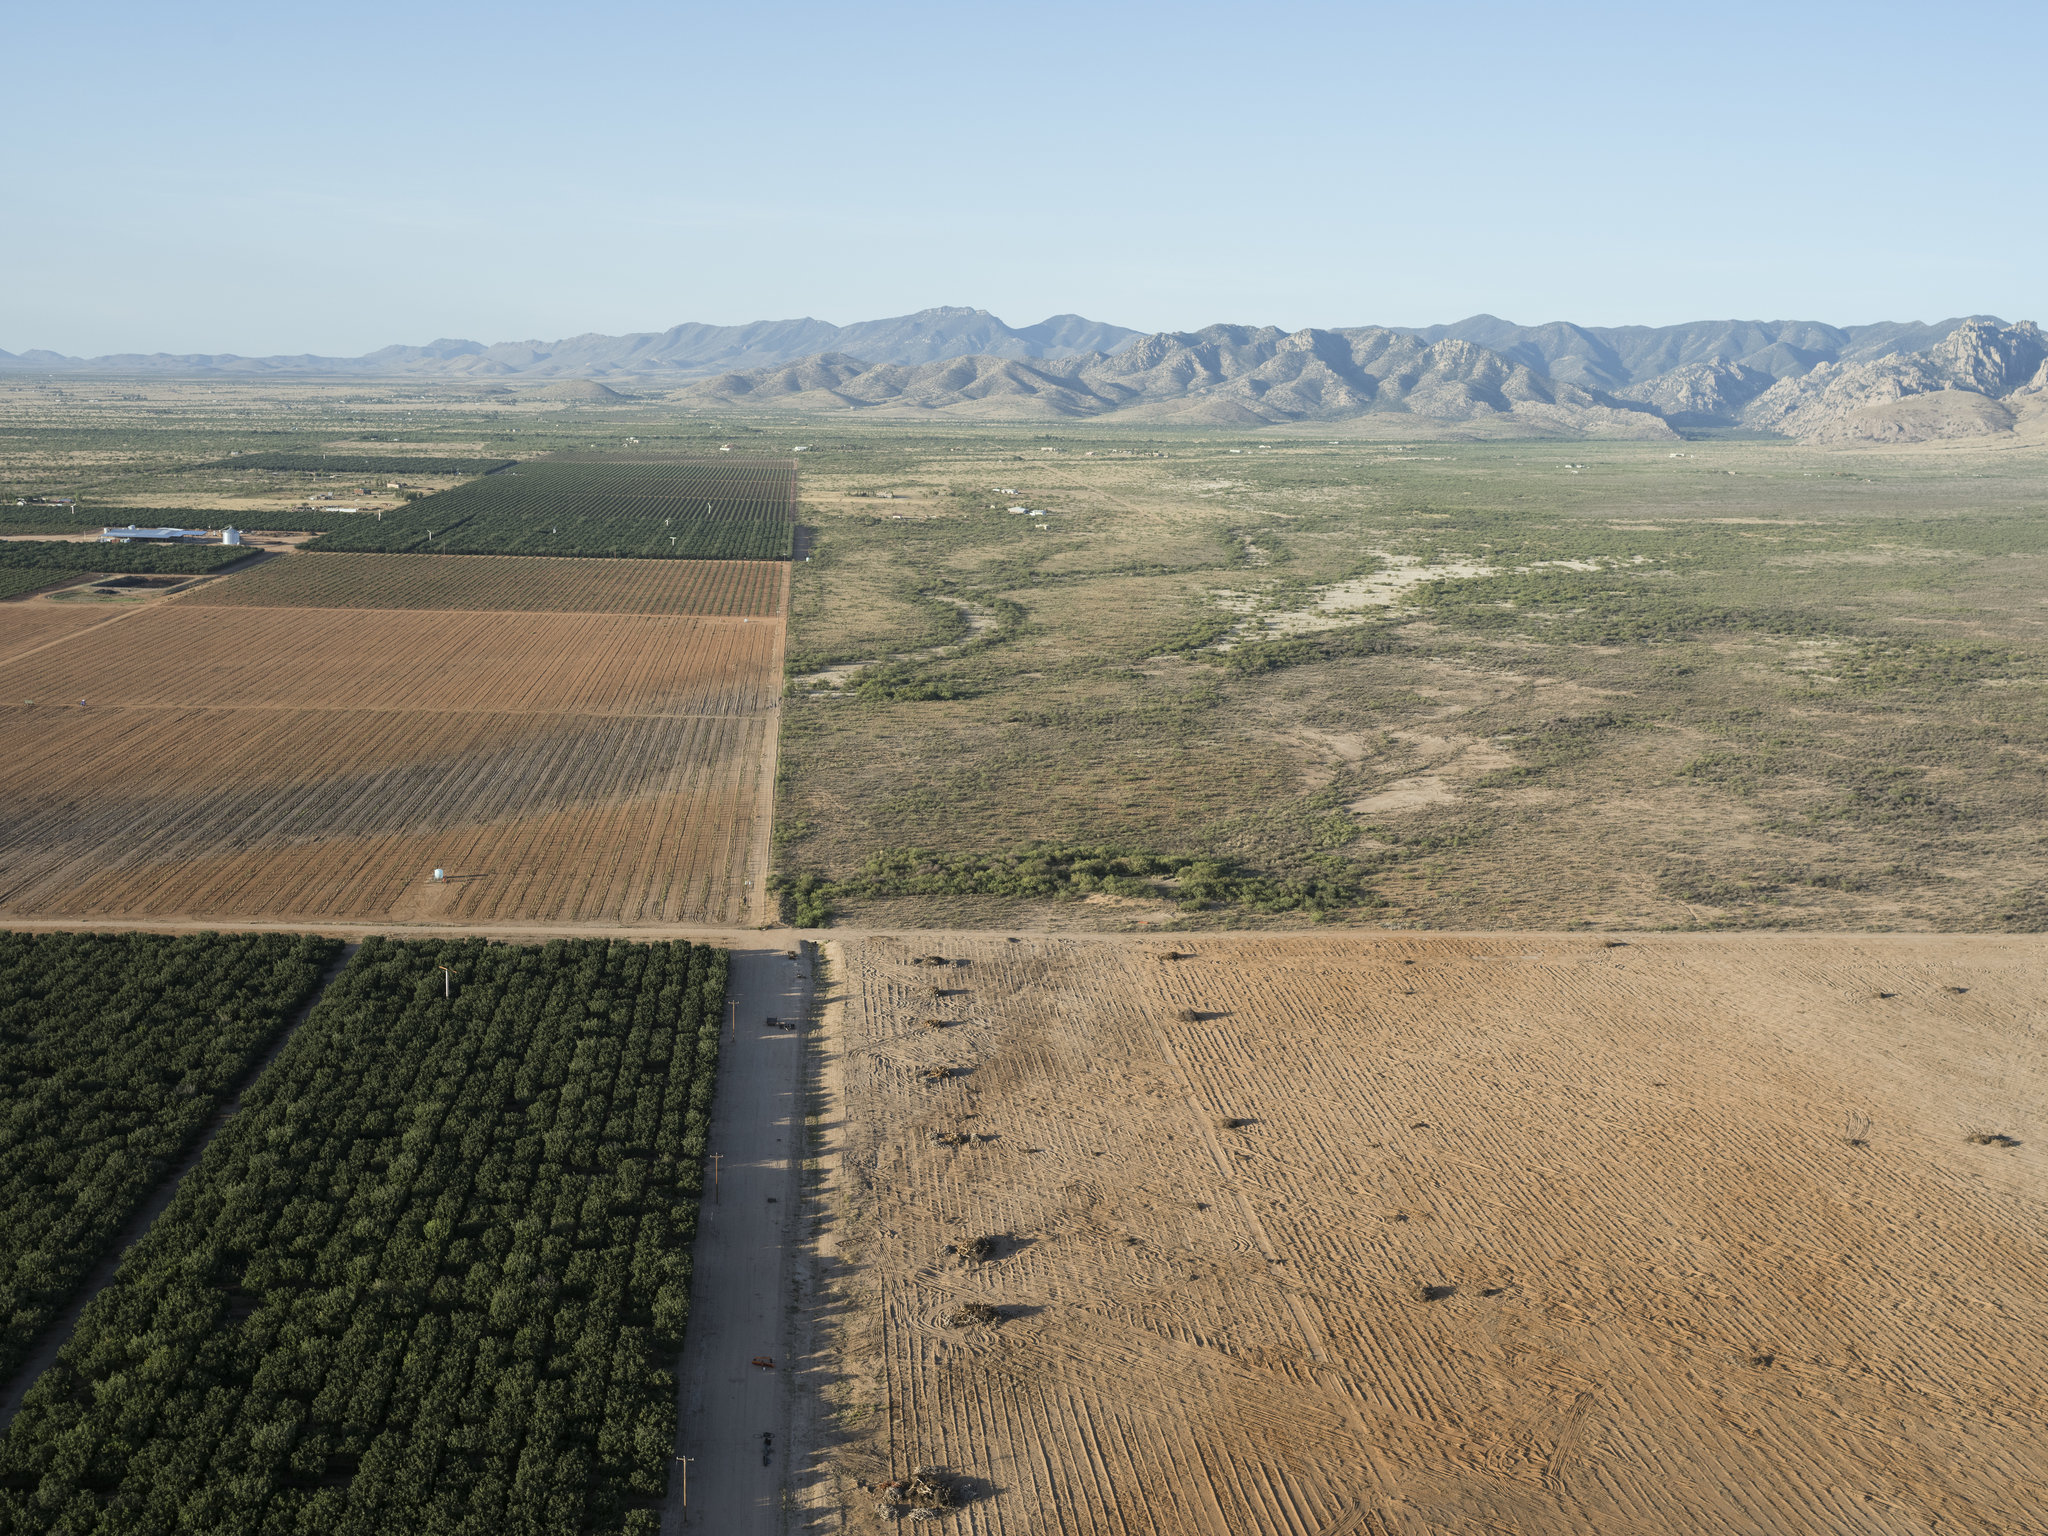 Farmland in the Sulphur Springs Valley of Arizona. (Credit: Lucas Foglia for The New York Times)